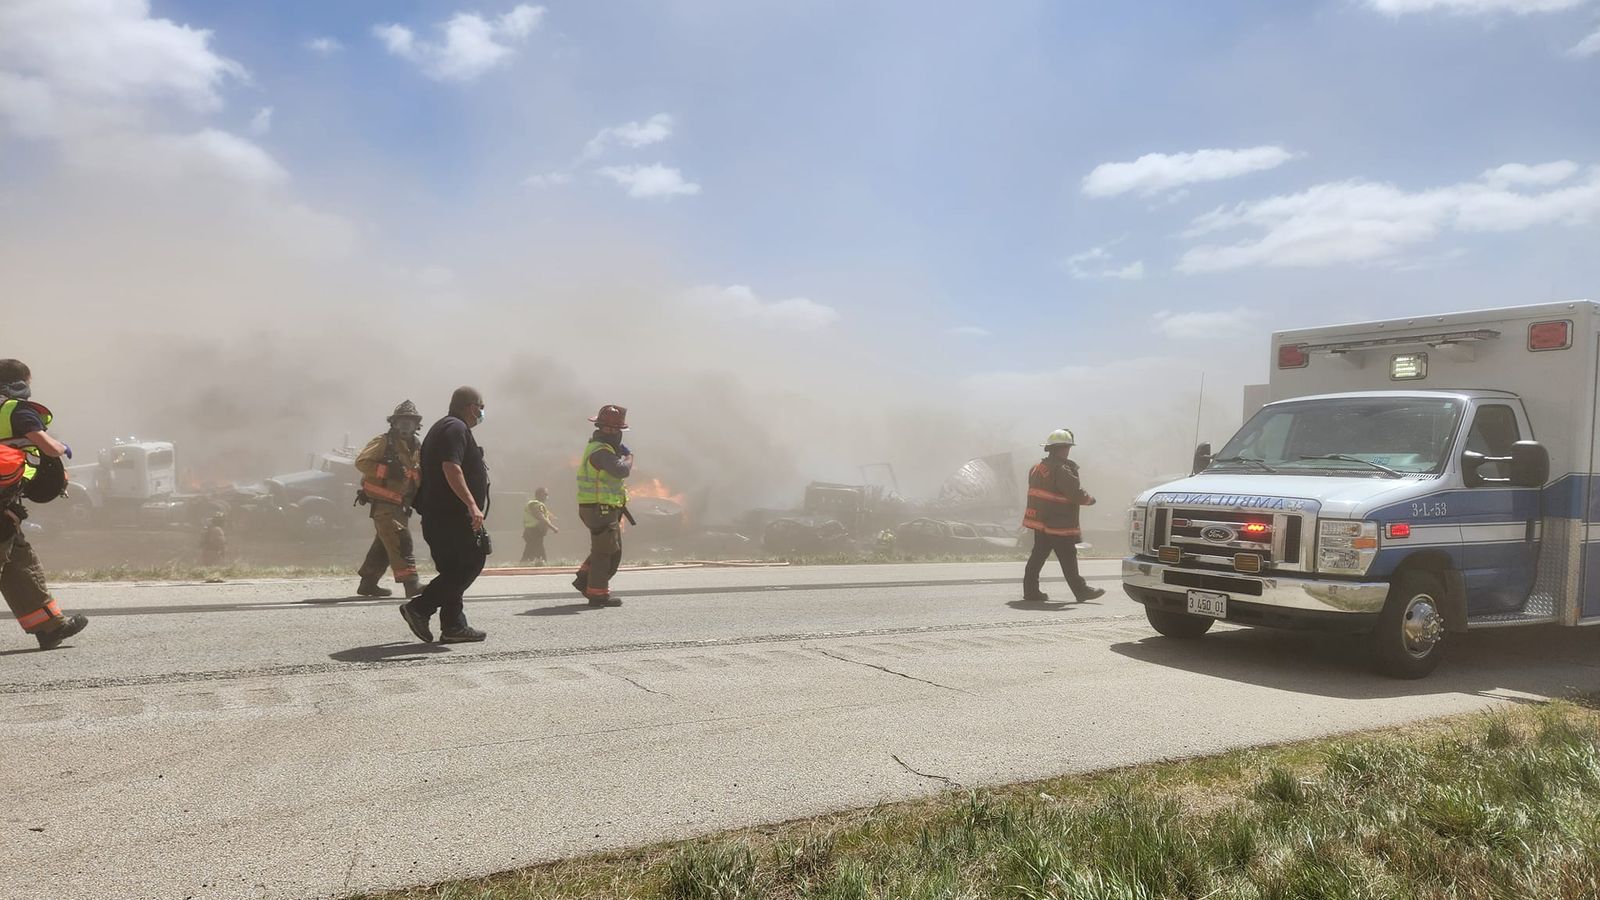 'Multiple fatalities' and dozens wounded in car crashes during dust storm in Illinois